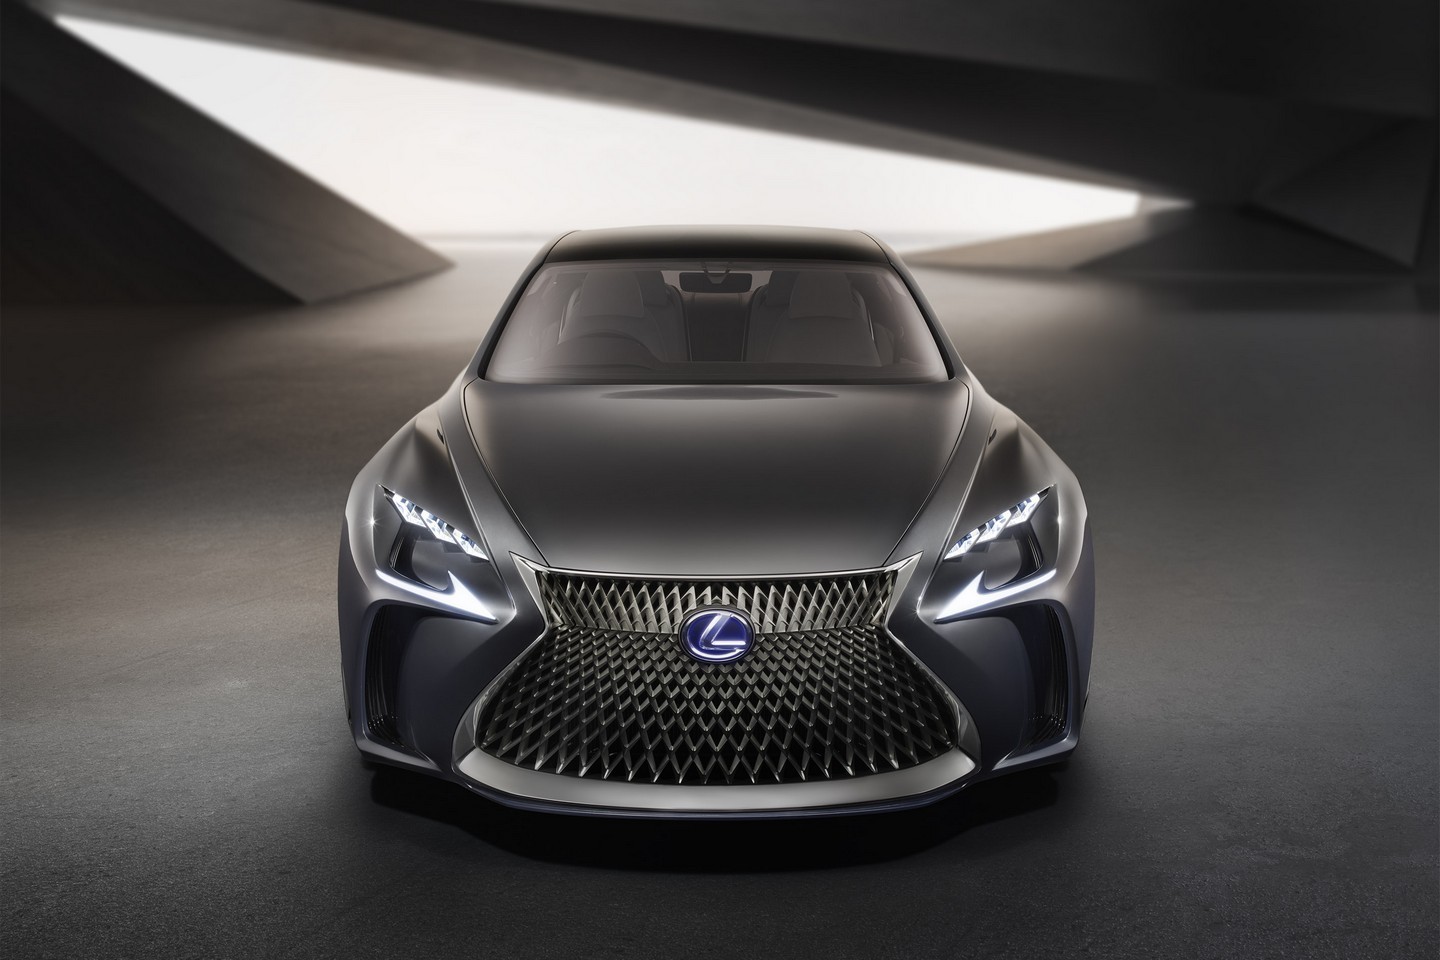 Sexy Lexus Lf Fc Concept Previews Ls Flagship With Fuel Cell Tech Autoevolution